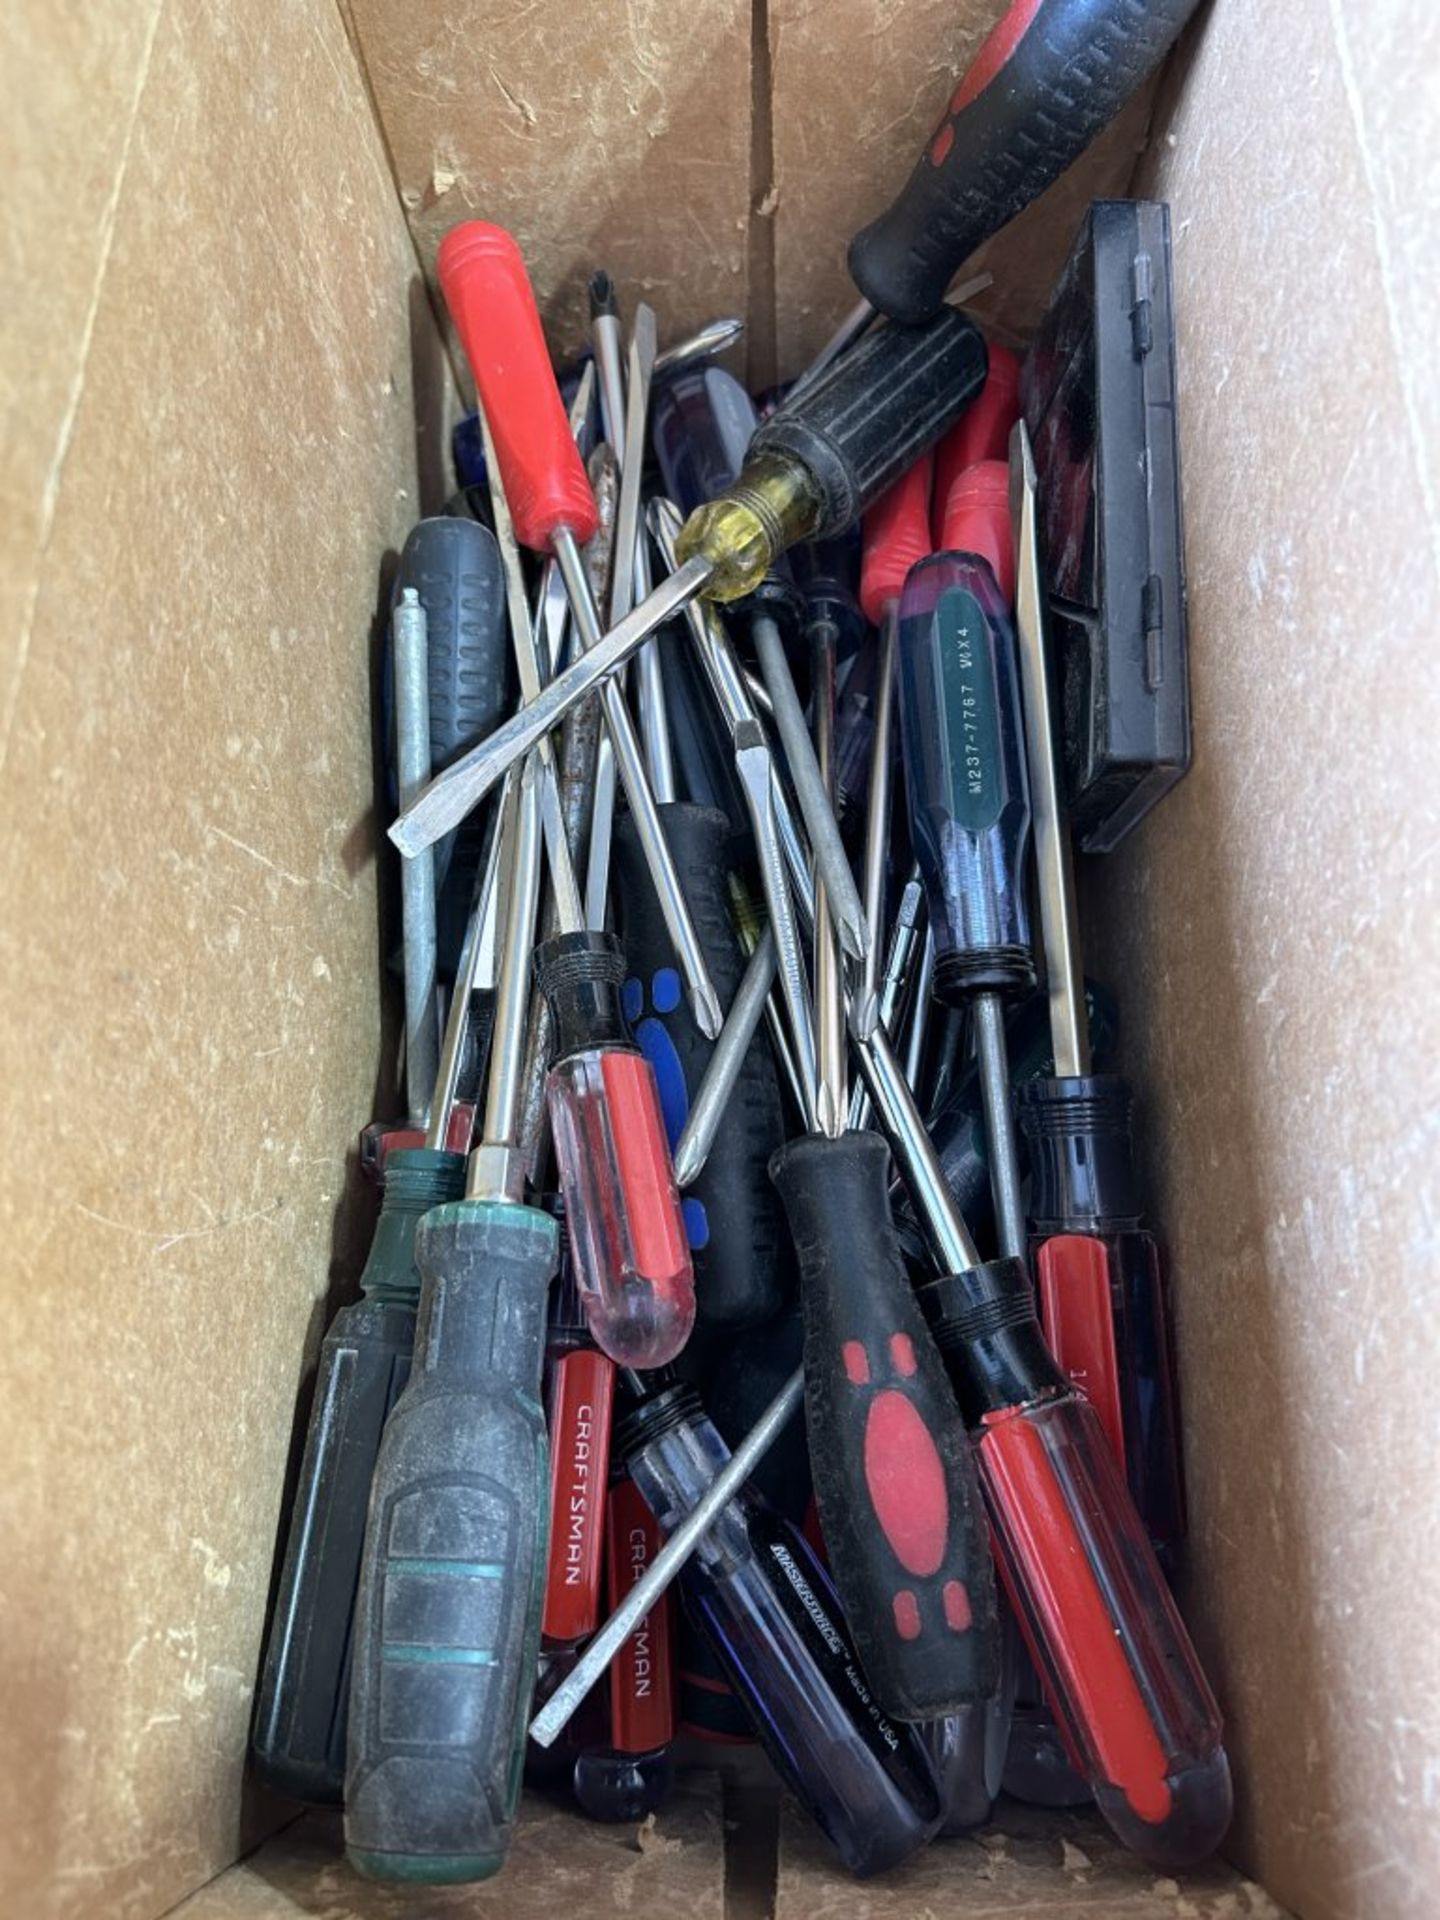 ASSORTED DRILL BITS, DRILL DOCTOR, CHISELS, SCREWDRIVERS, ETC. - Image 5 of 10